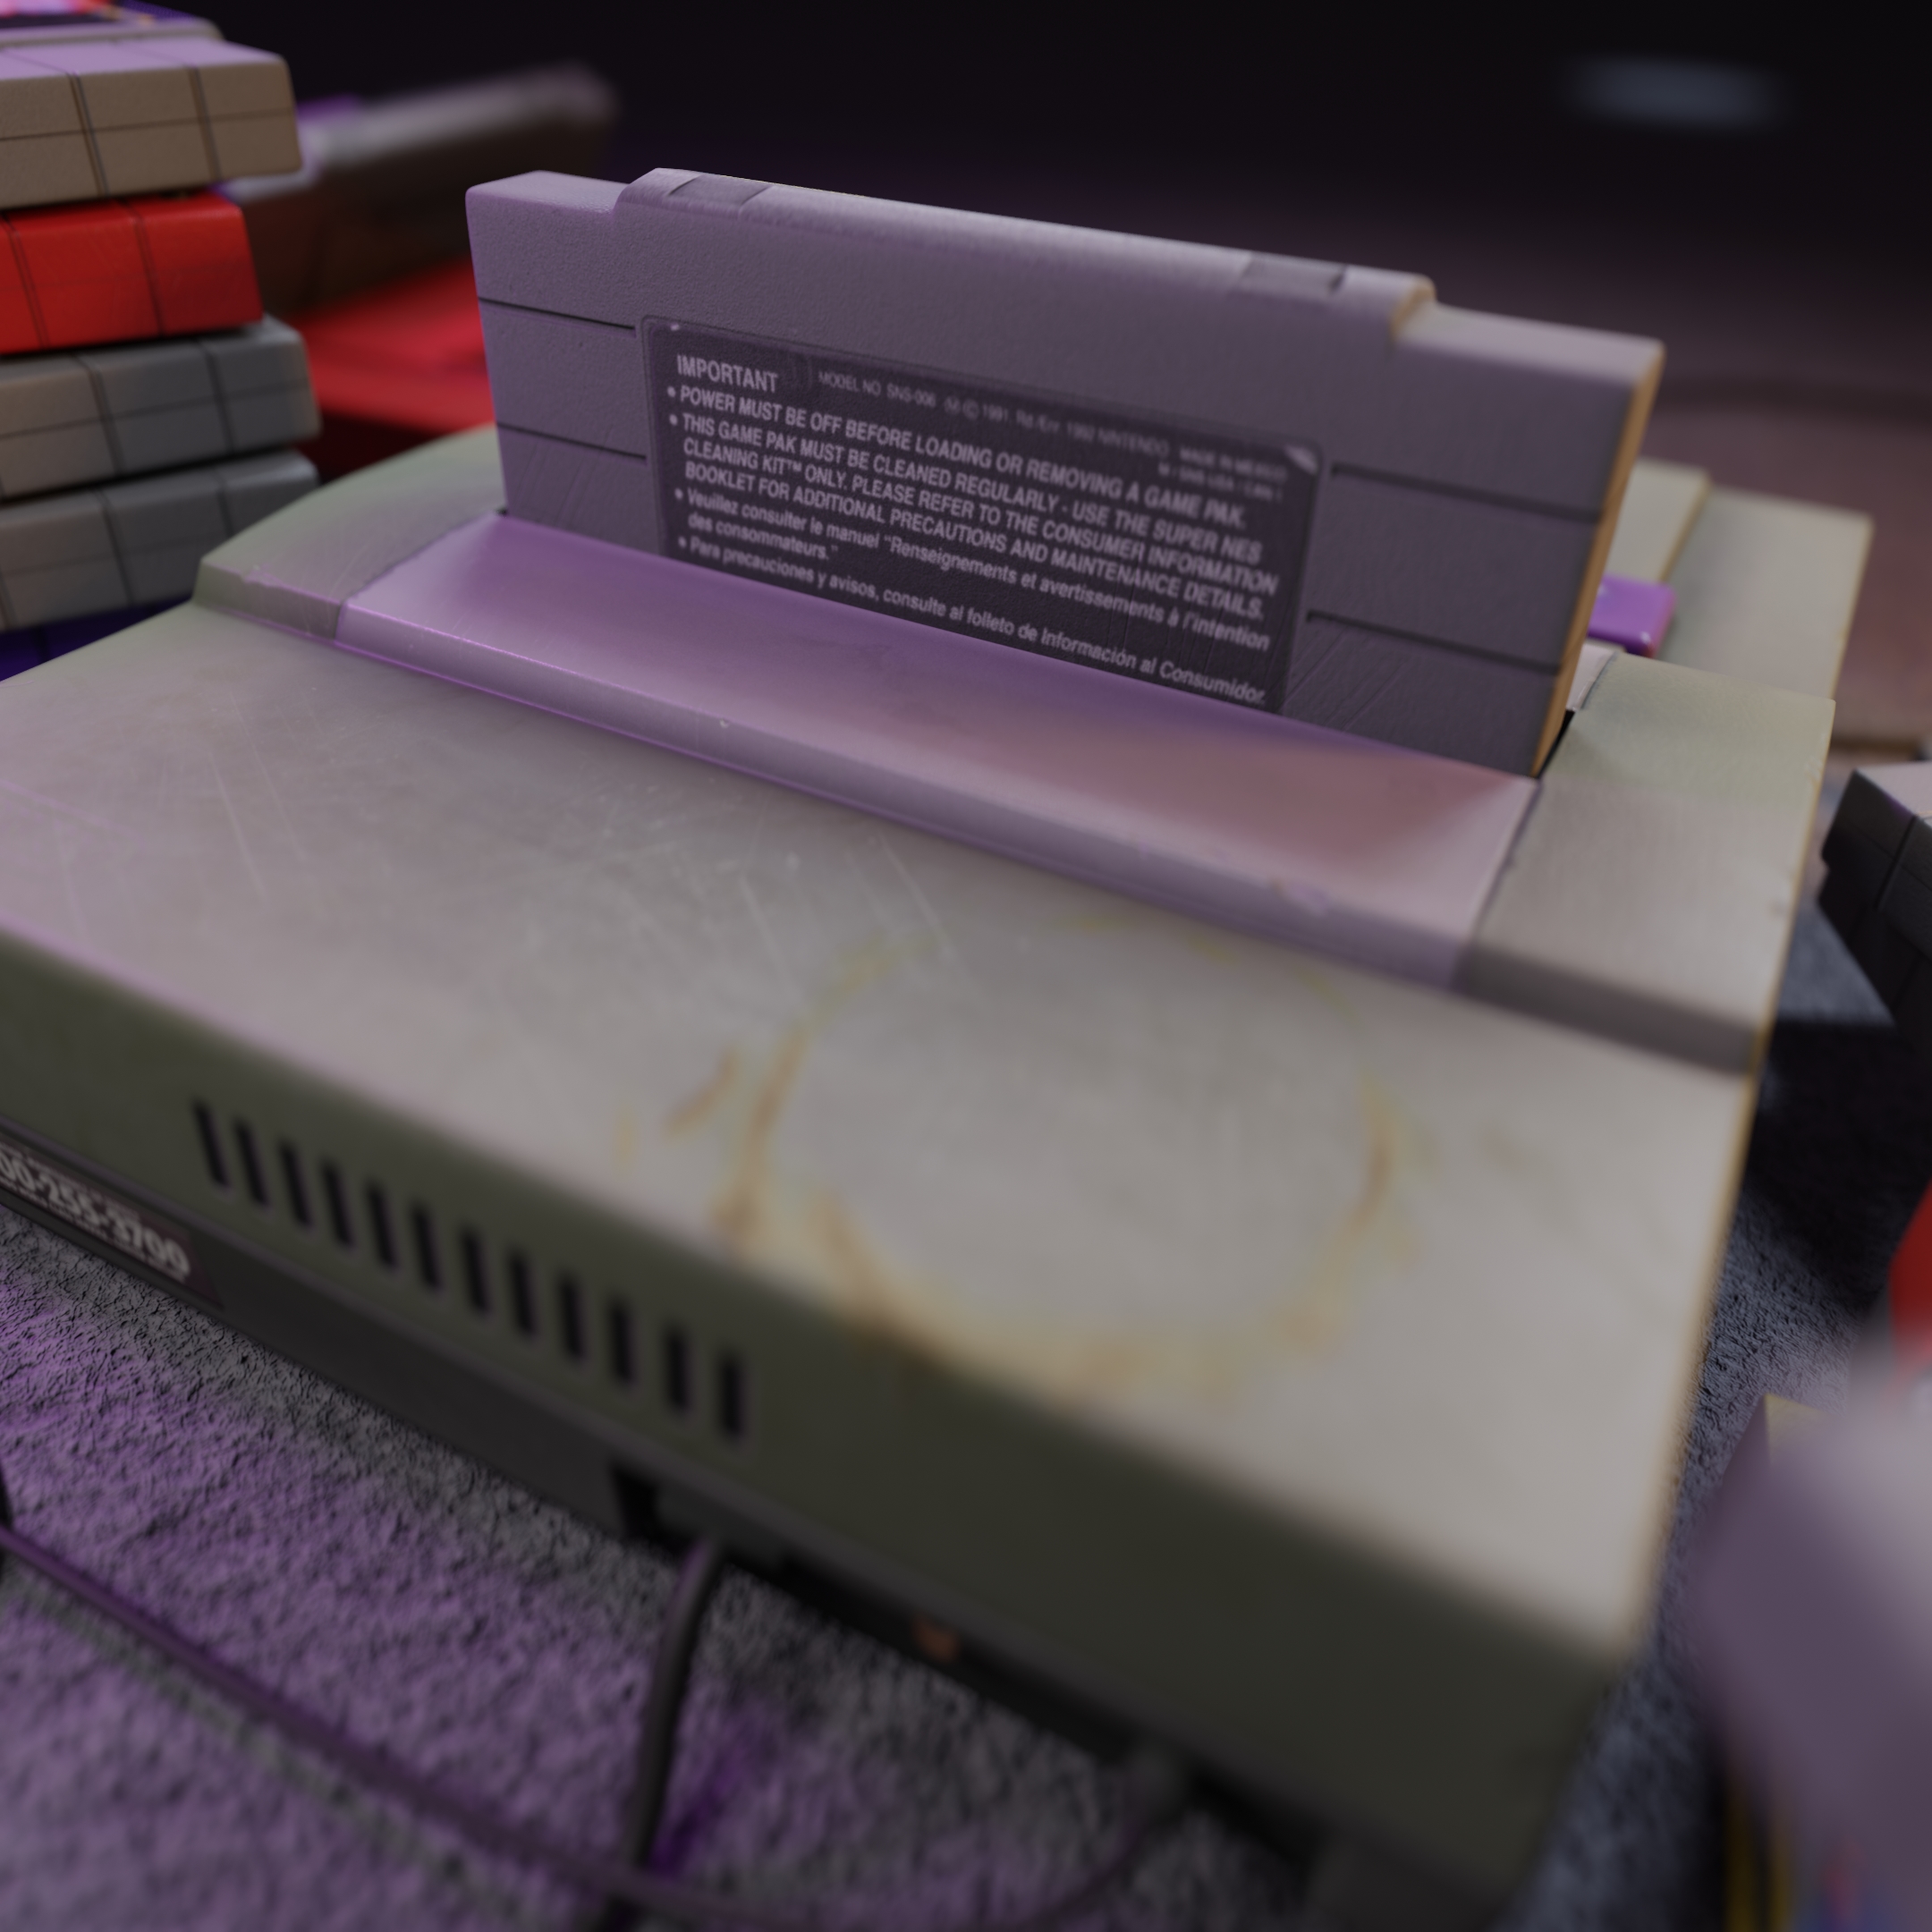 Abused Super NES preview image 3